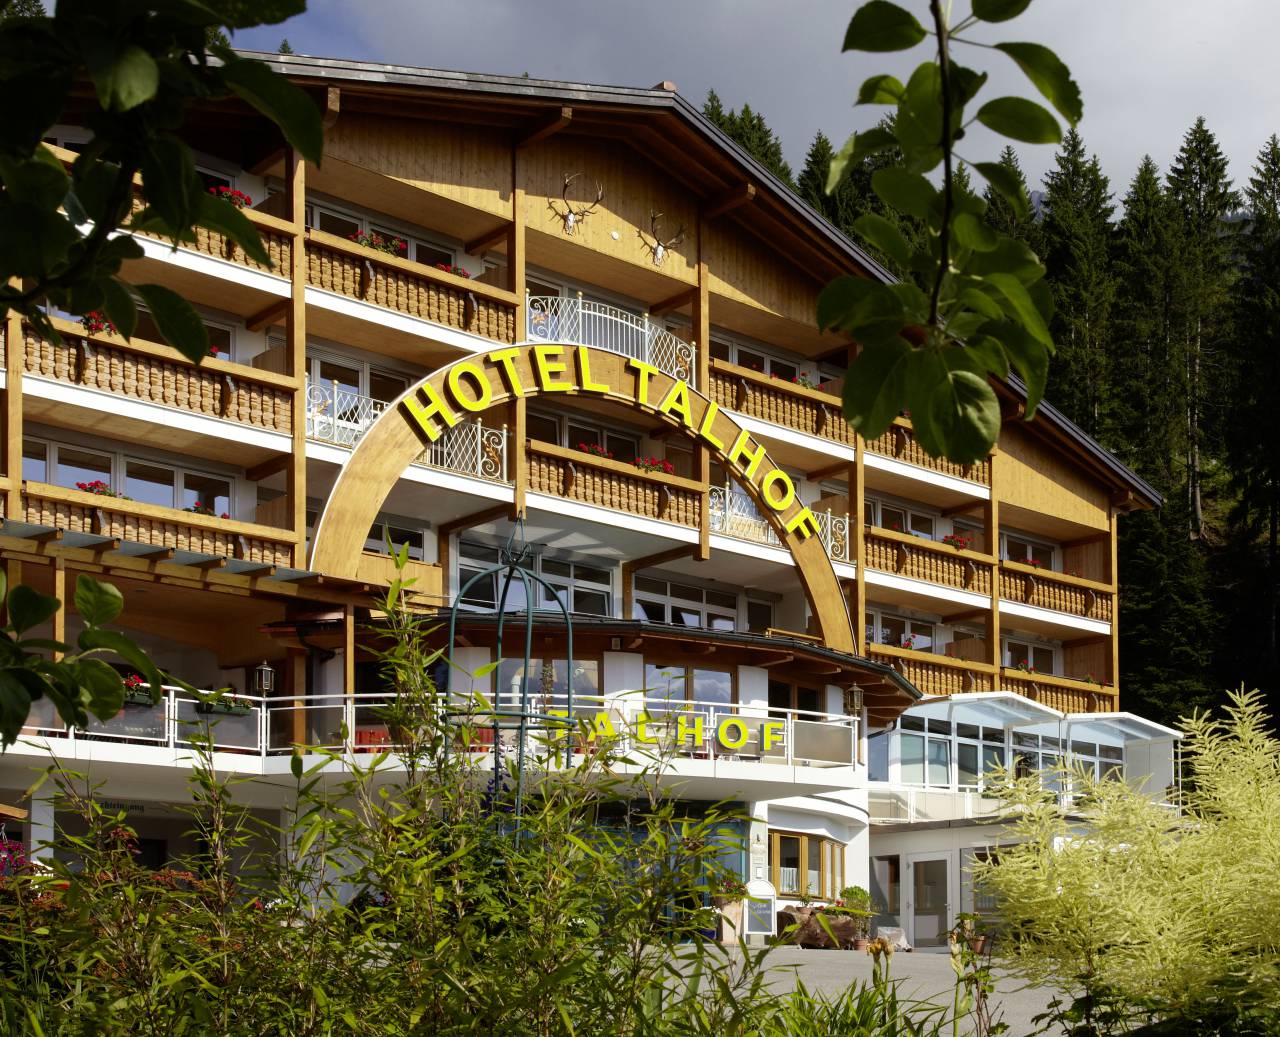 Exterior facade and entrance area of the Panoramahotel Talhof in Wängle near Reutte 